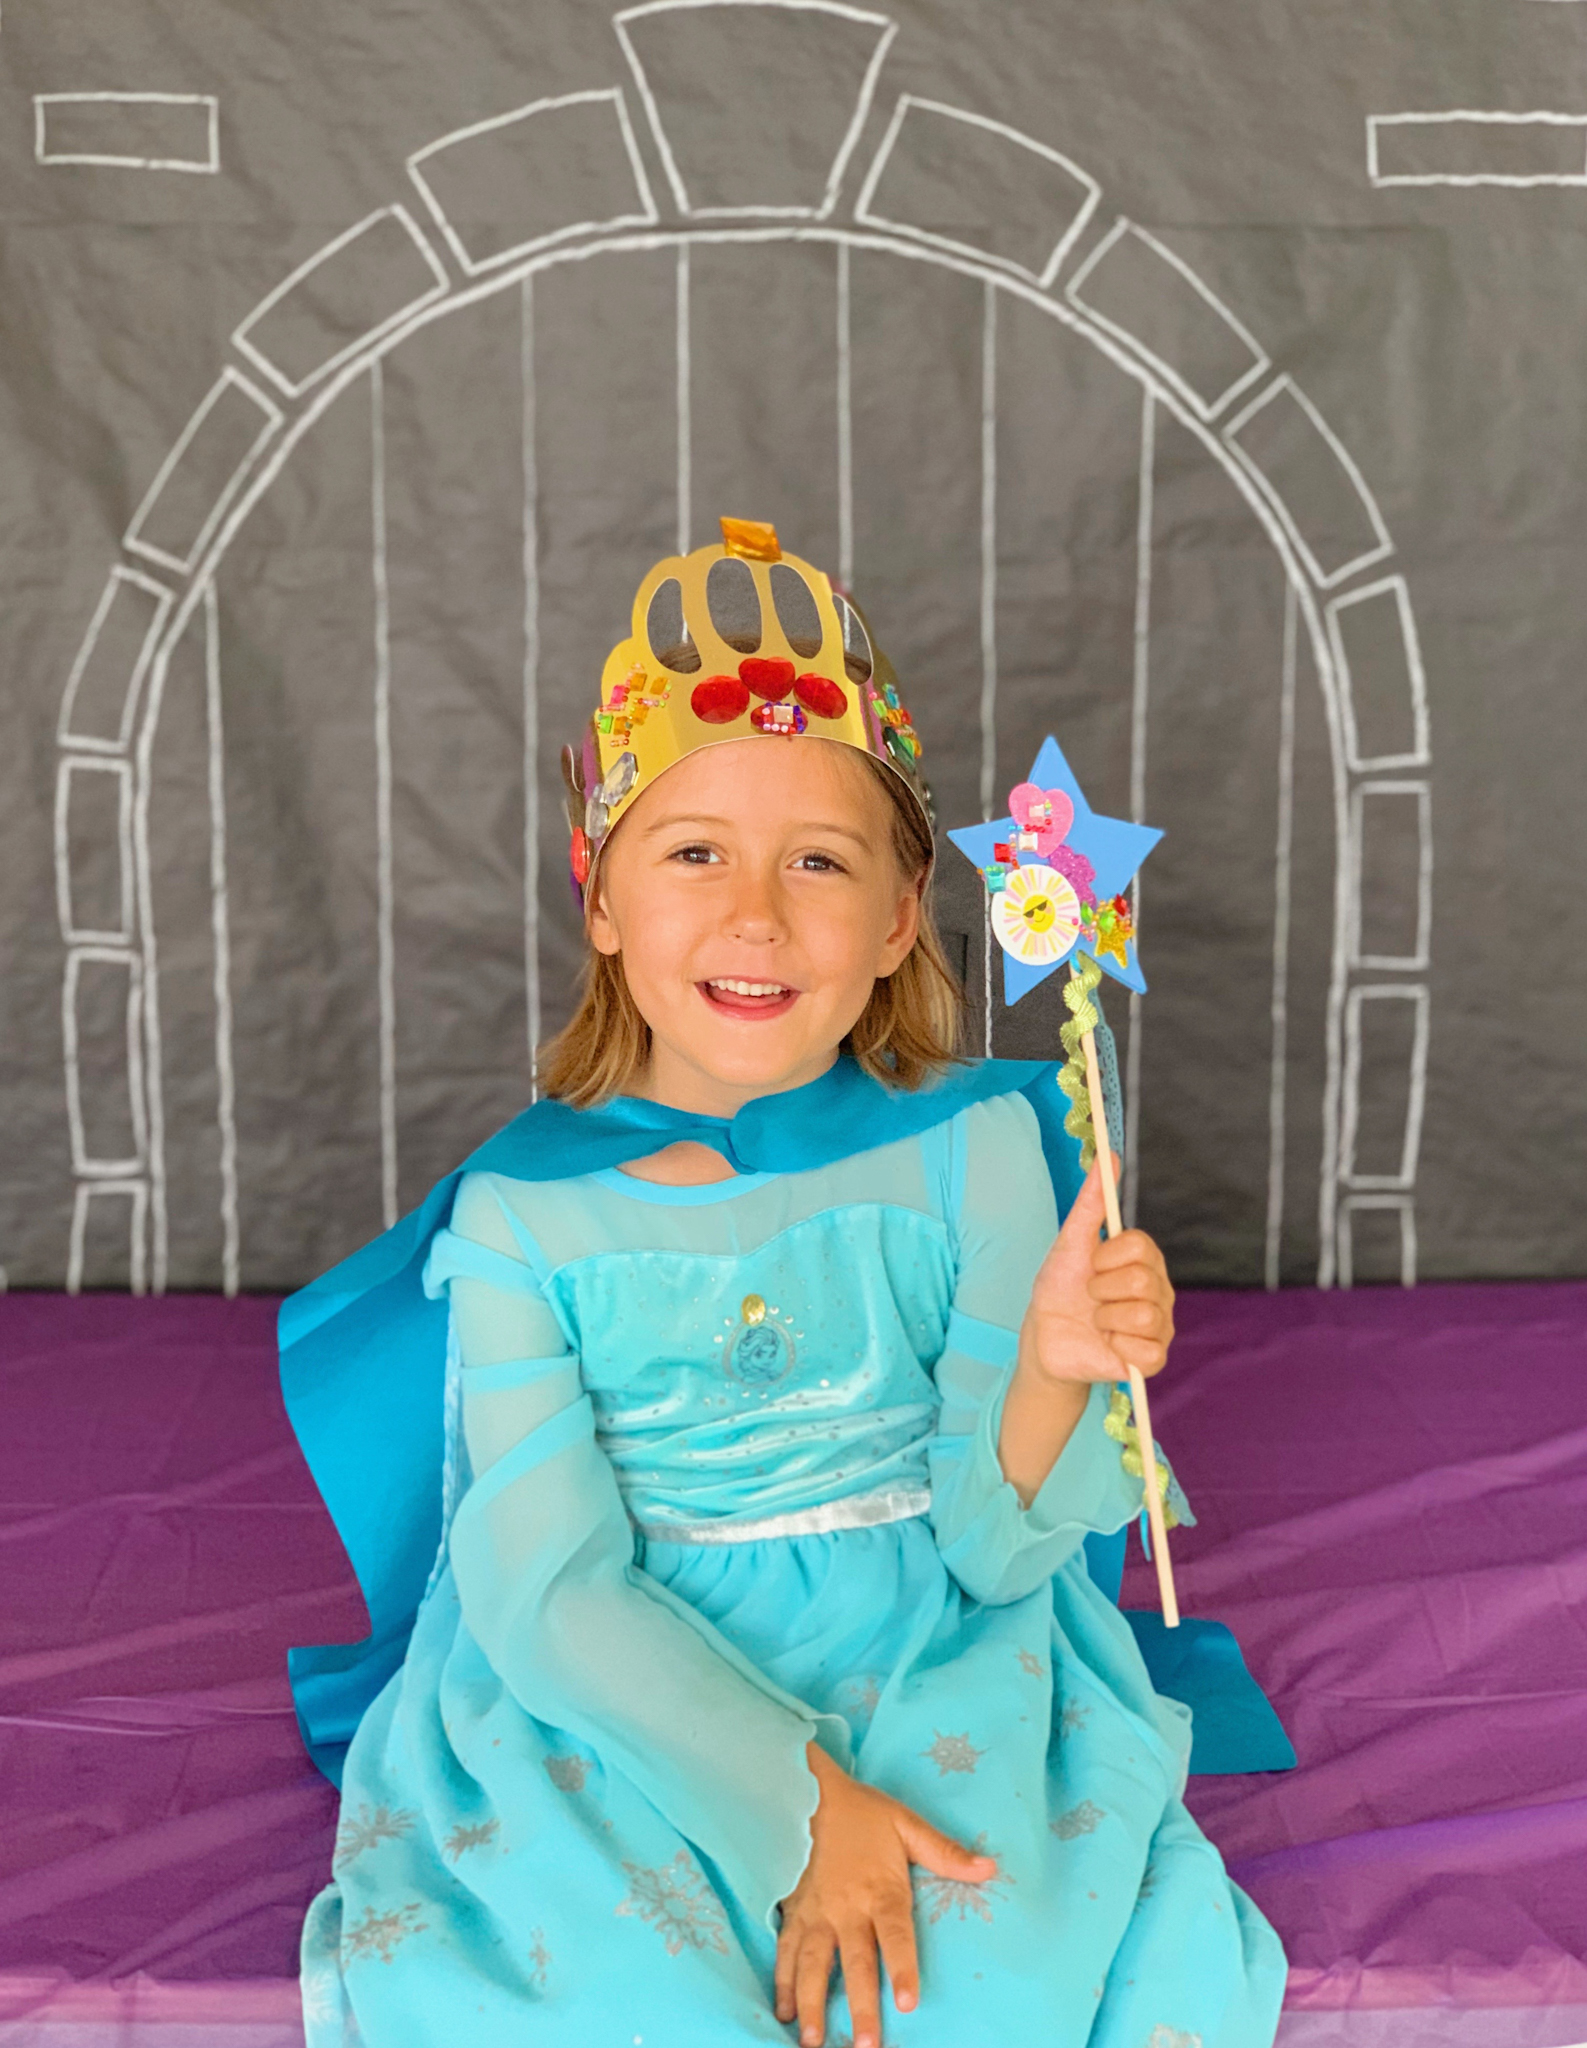 Juniper's "Princesses & Knights" 5th Birthday Pool Party & Royal Golden Birthday Celebration | Creative ideas including a punny invitation, DIY castle backdrop, a golden birthday banner, creative activities for kids of all ages & party favors galore! via thinkingcloset.com